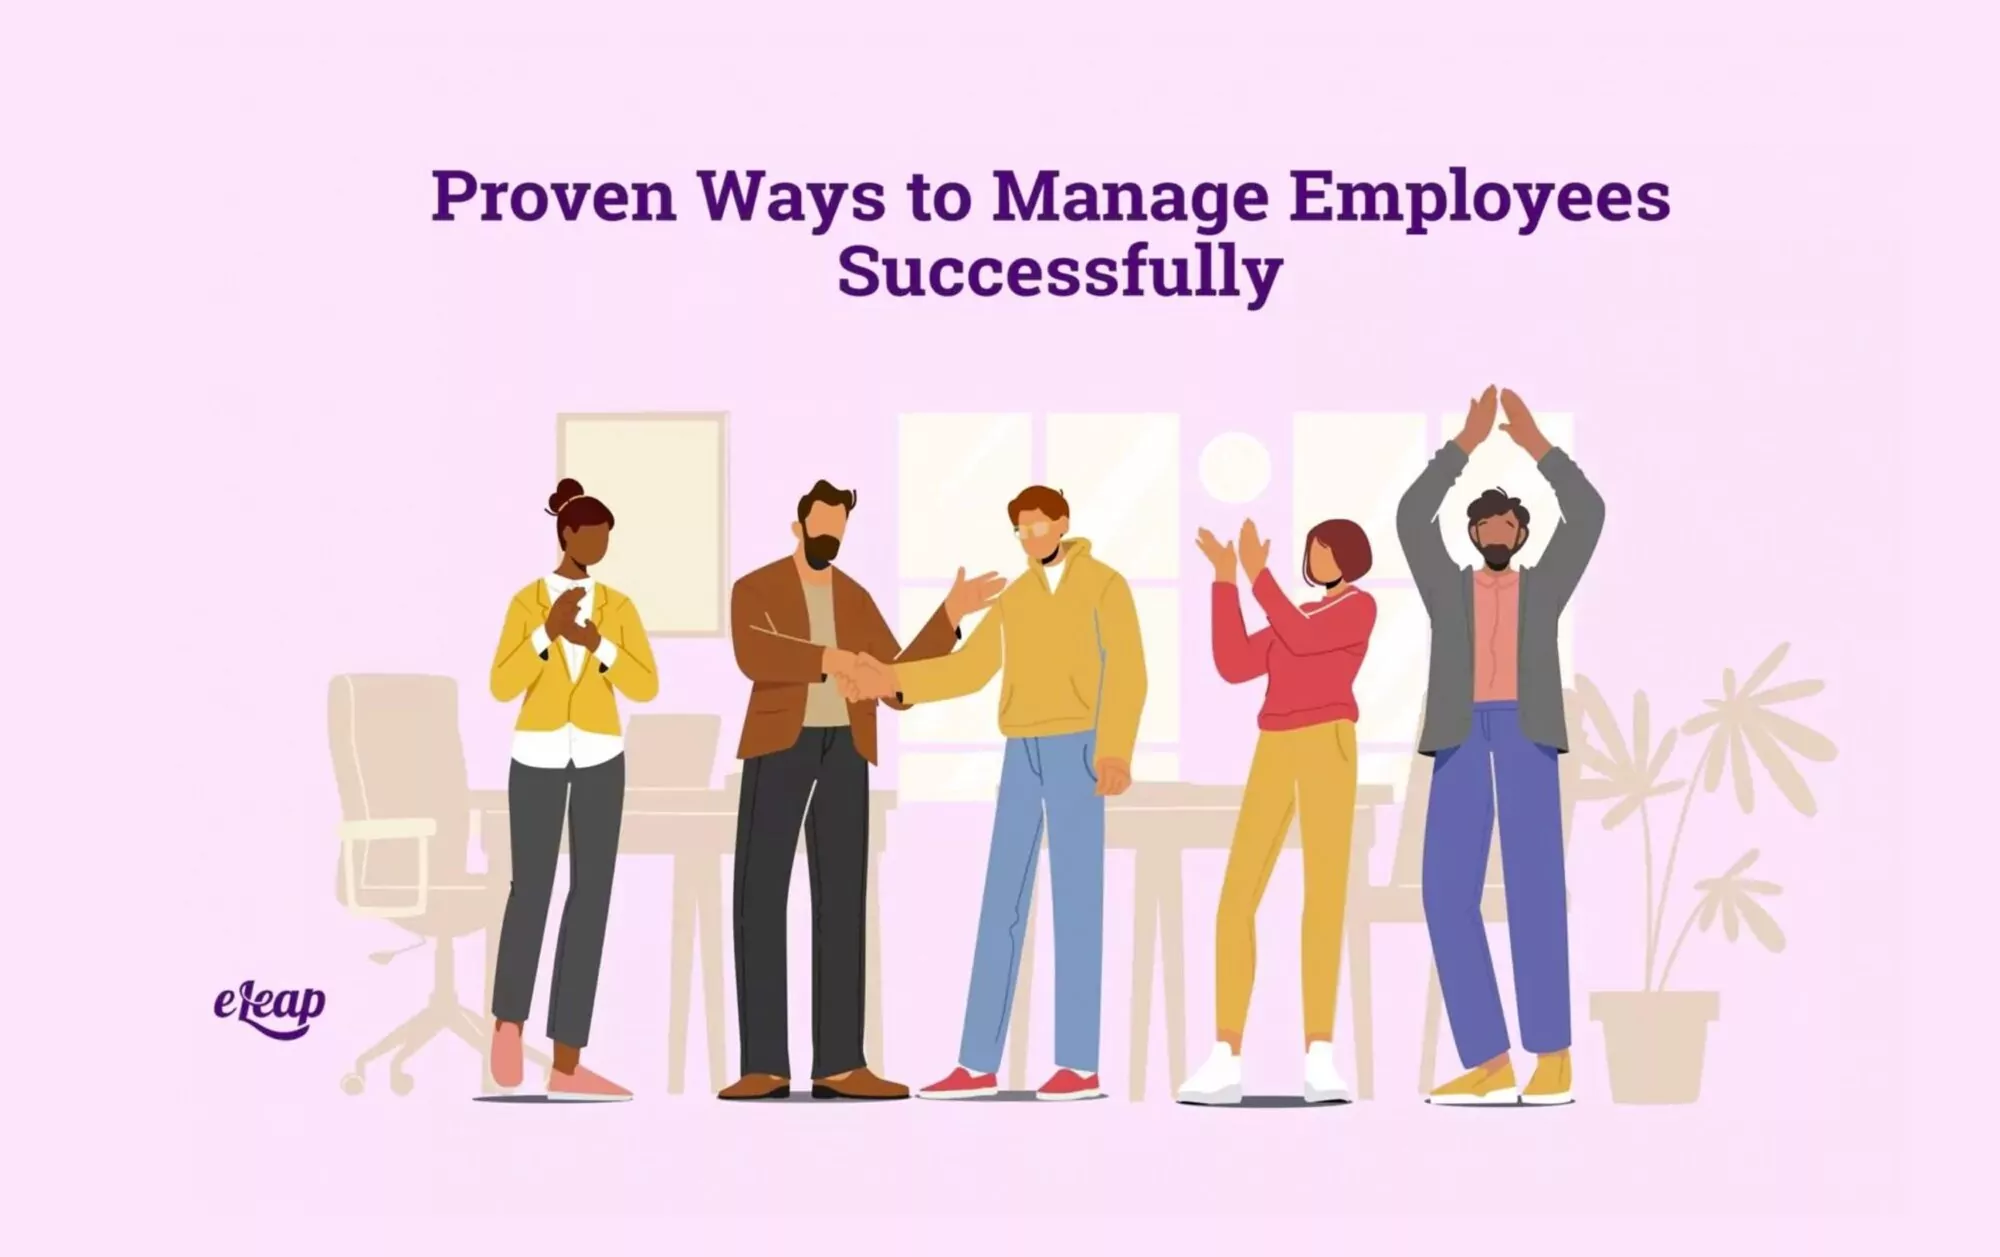 Proven Ways to Manage Employees Successfully